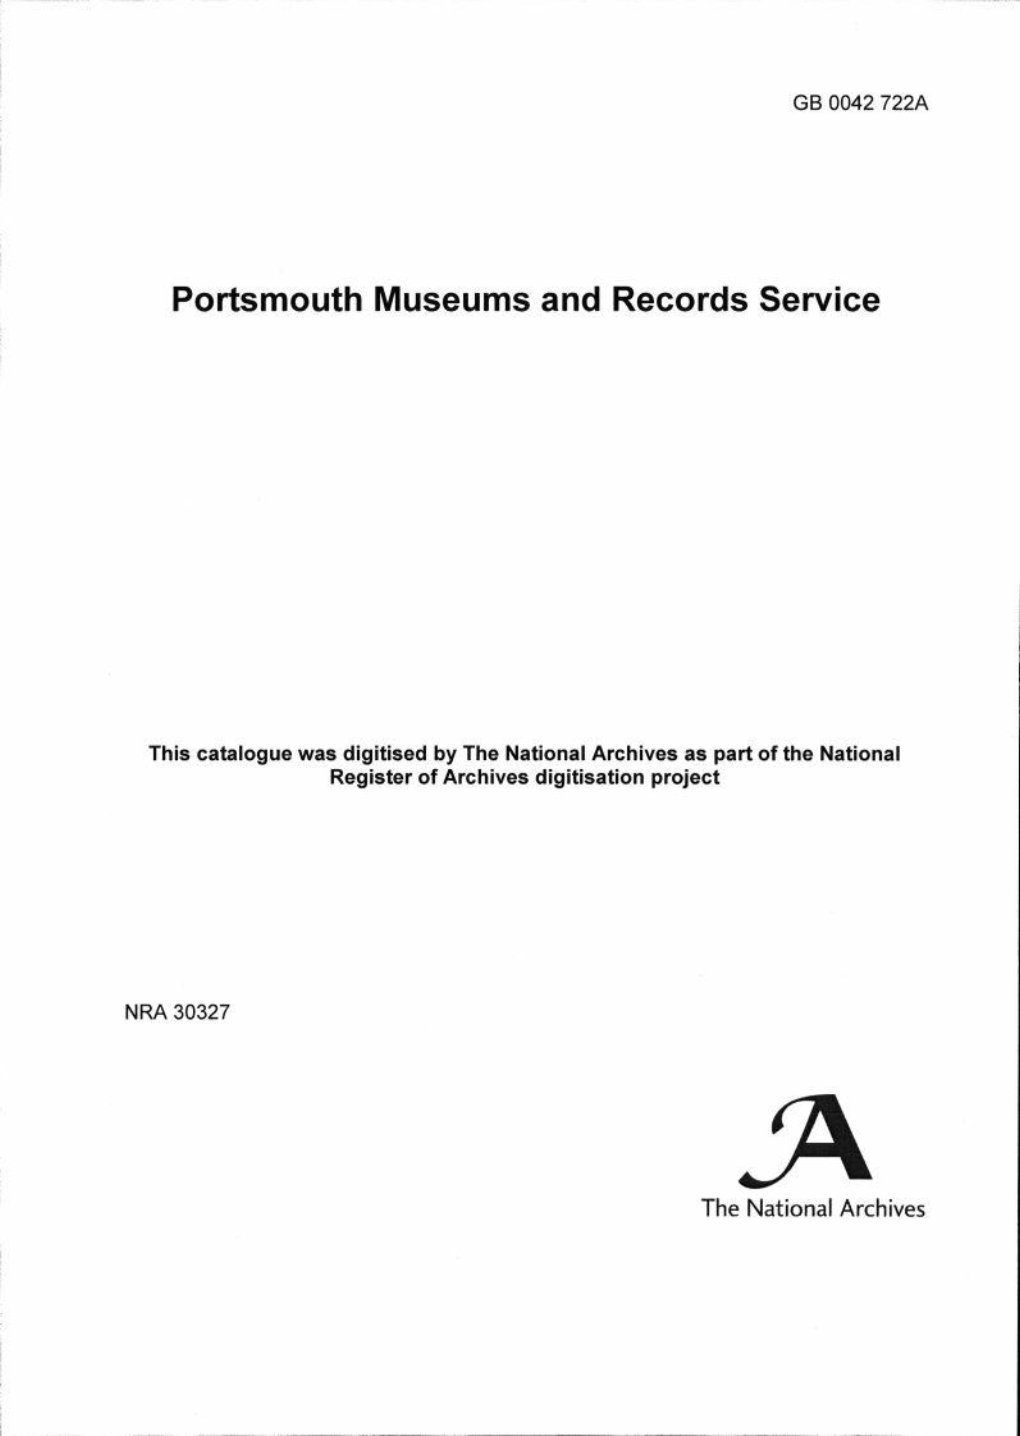 Portsmouth Museums and Records Service